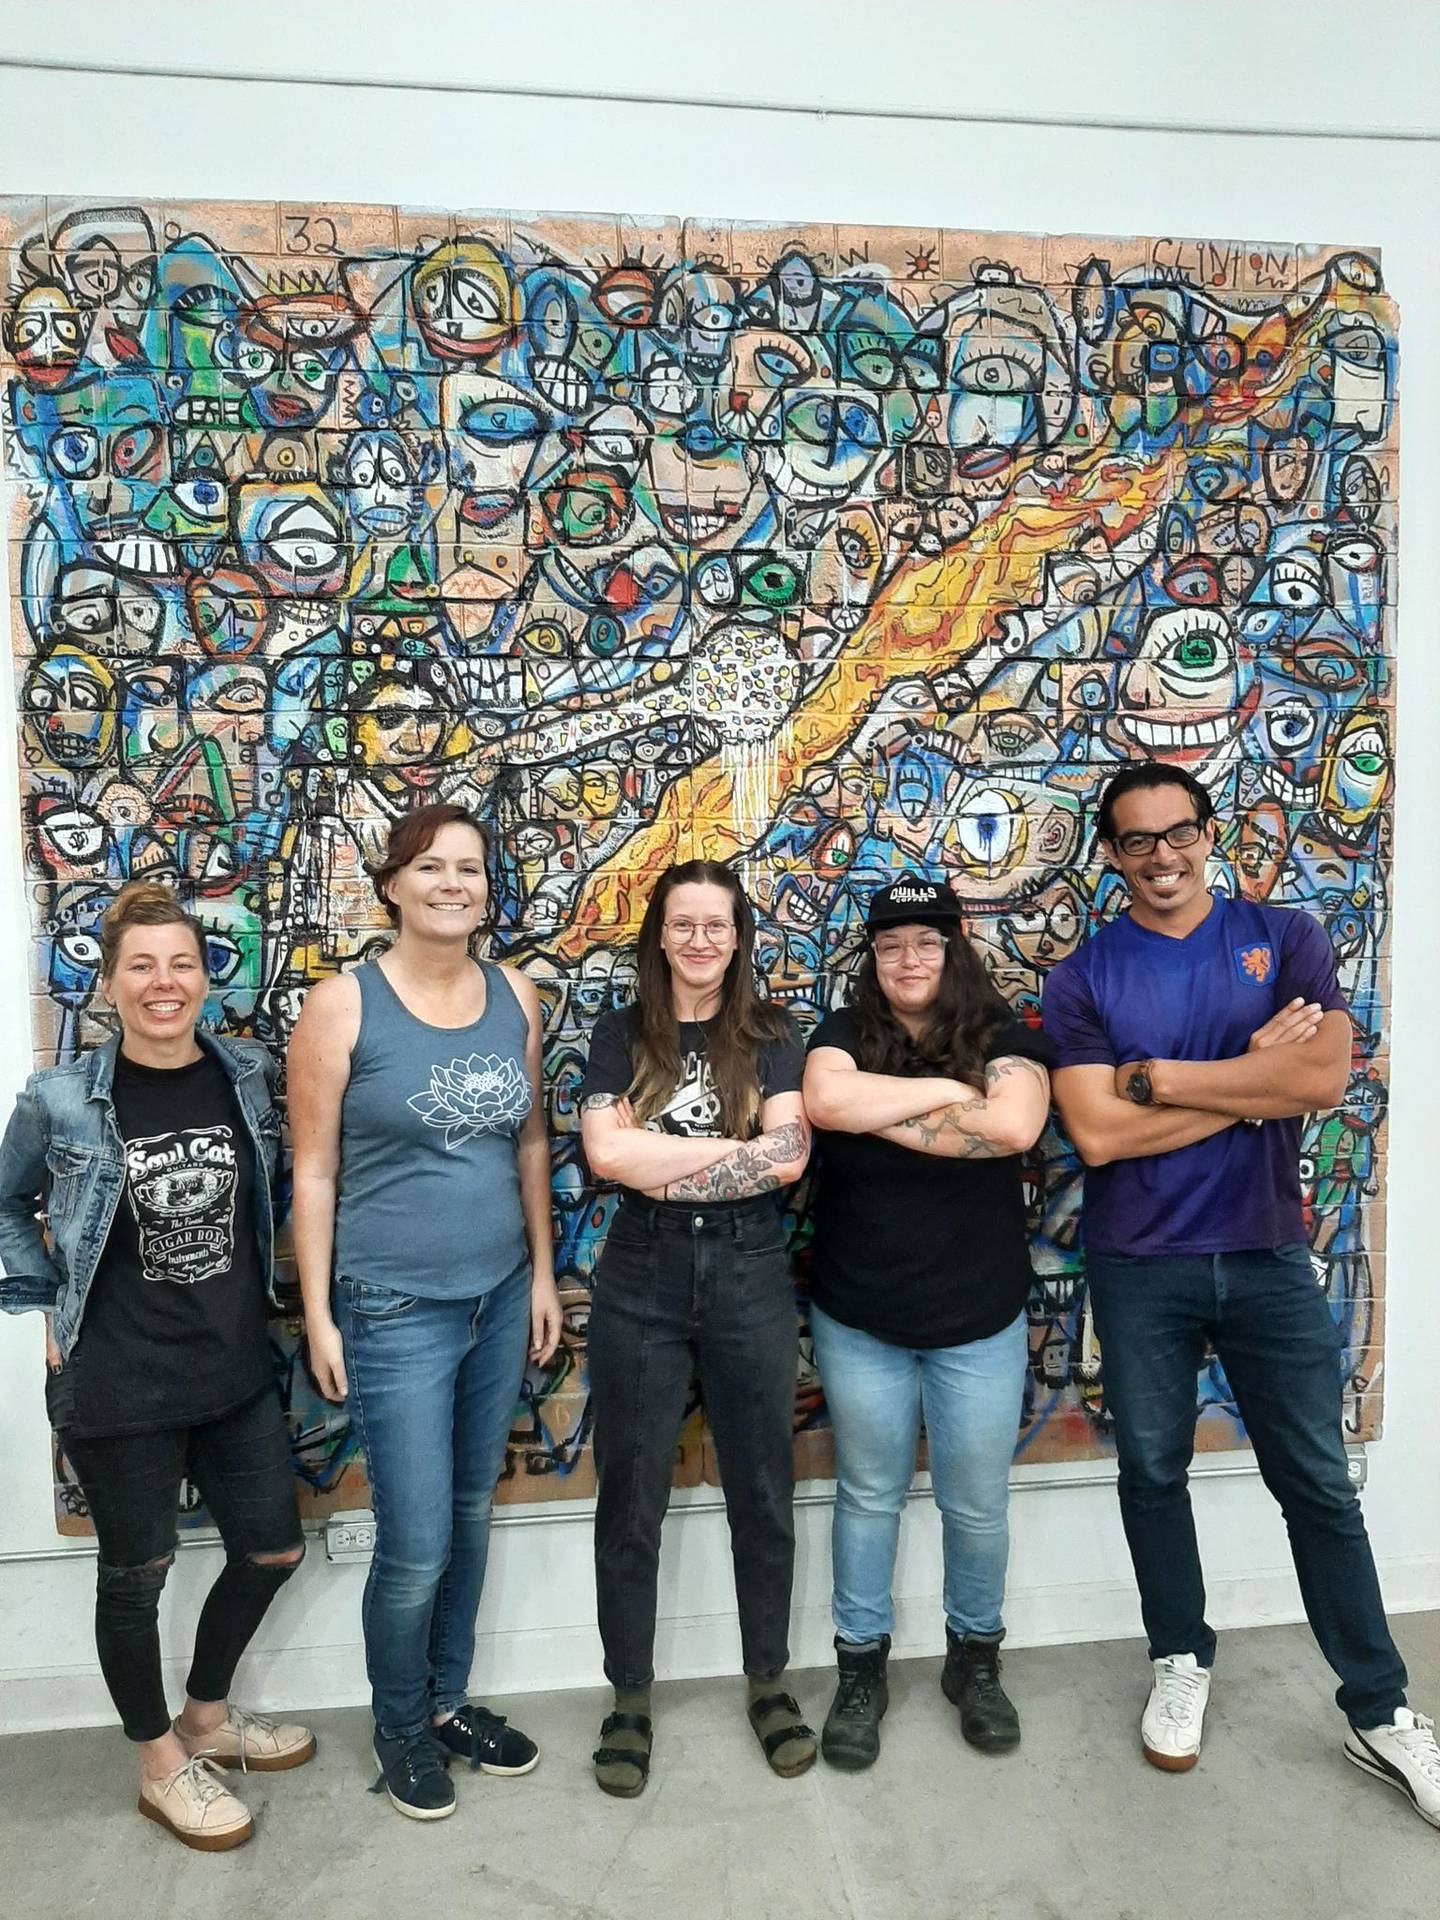 The Art Movement in Joliet will unveil five sculptures at 6 p.m., Thursday, July 28, 2022, at Juliet's Tavern in Joliet for its second annual summer sculpture exhibition and raffle. Pictured are the five commissioned artists for "Summer of Stone and Steel." They are (from left) Alicia Diamond, Sarah Potter, Brittanie Rousseau, Angelica Aguilar, and Erick “Roho” Garcia. Not pictured: Kelly Bartels.